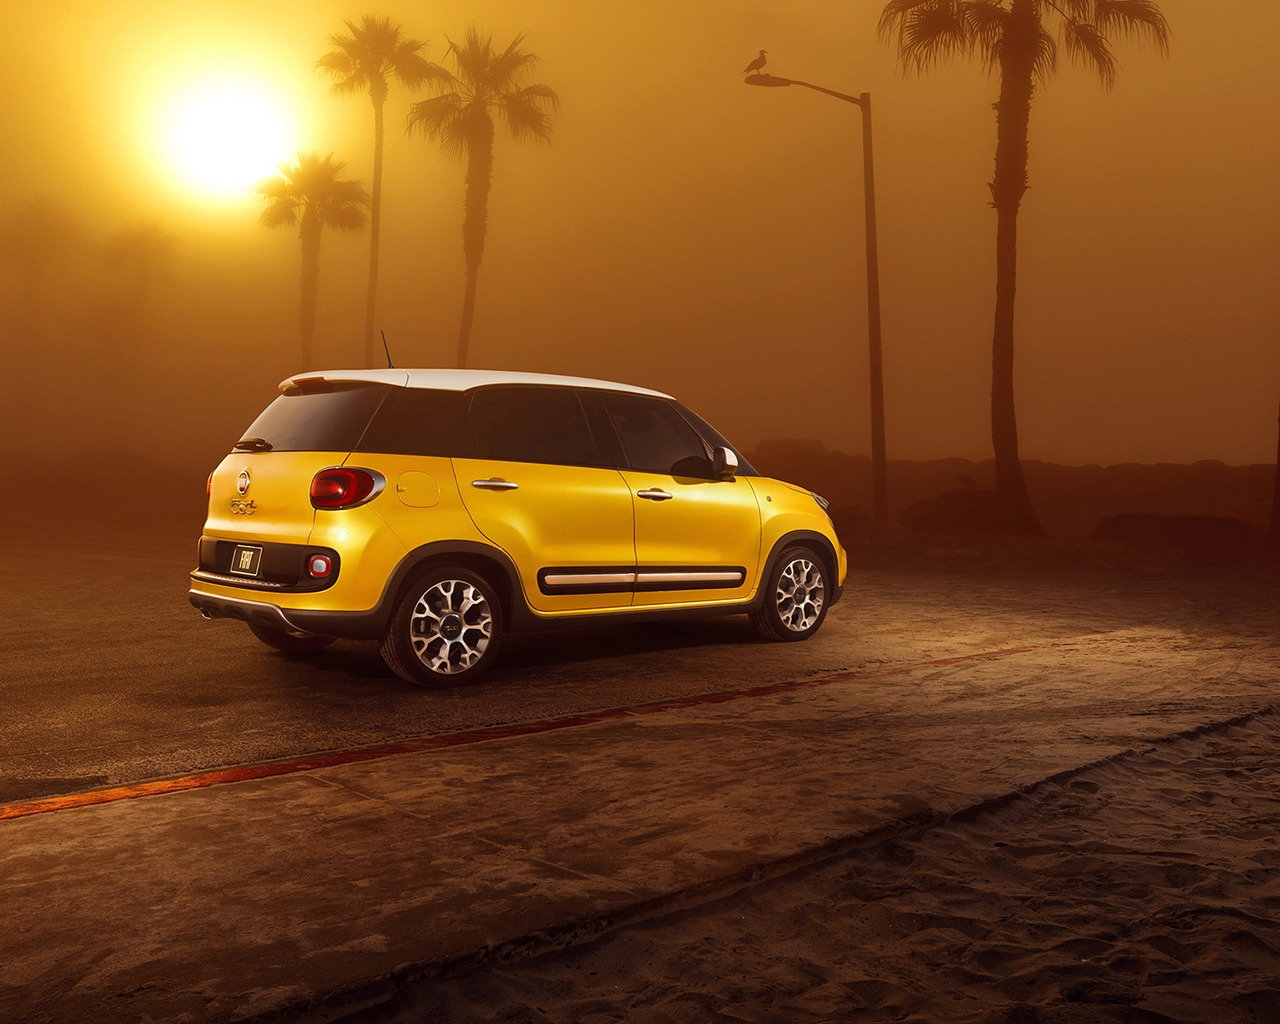 Sunset and Fiat 500L for 1280 x 1024 resolution